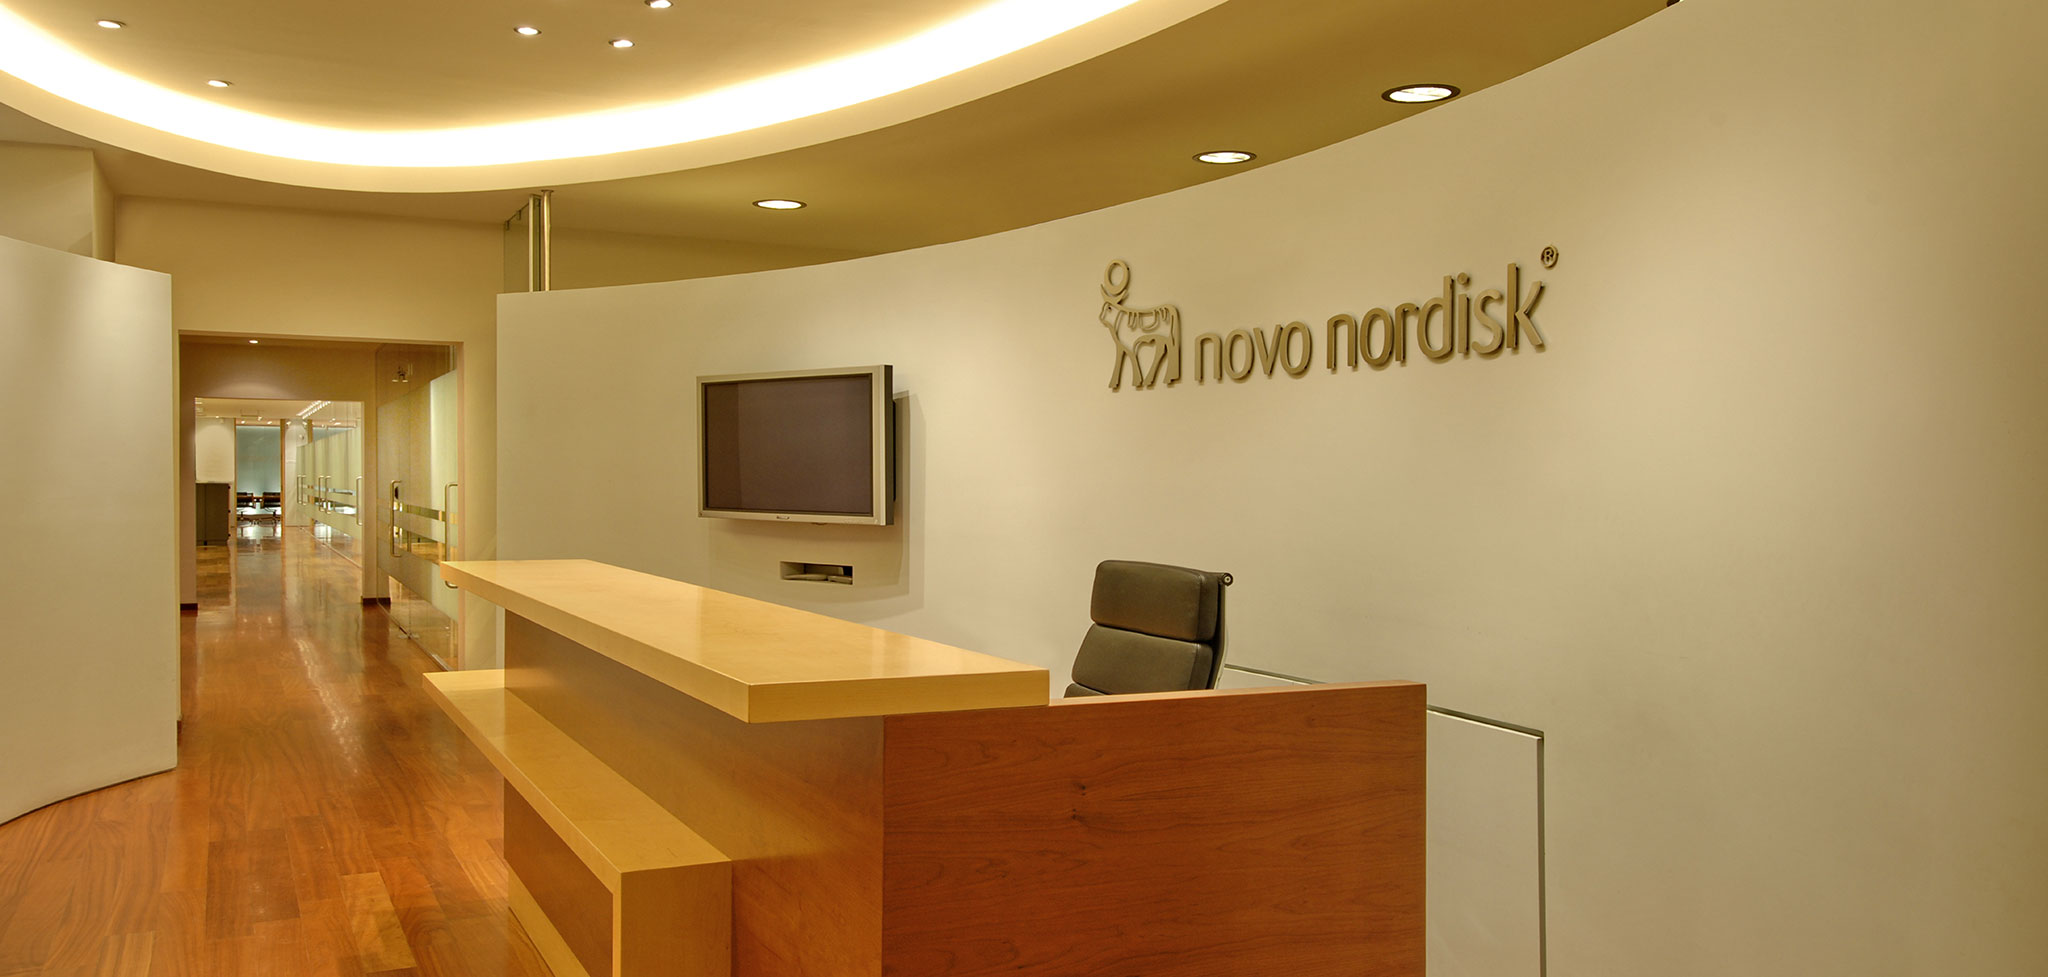 Offices of pharmaceutical company Novo Nordisk A/S